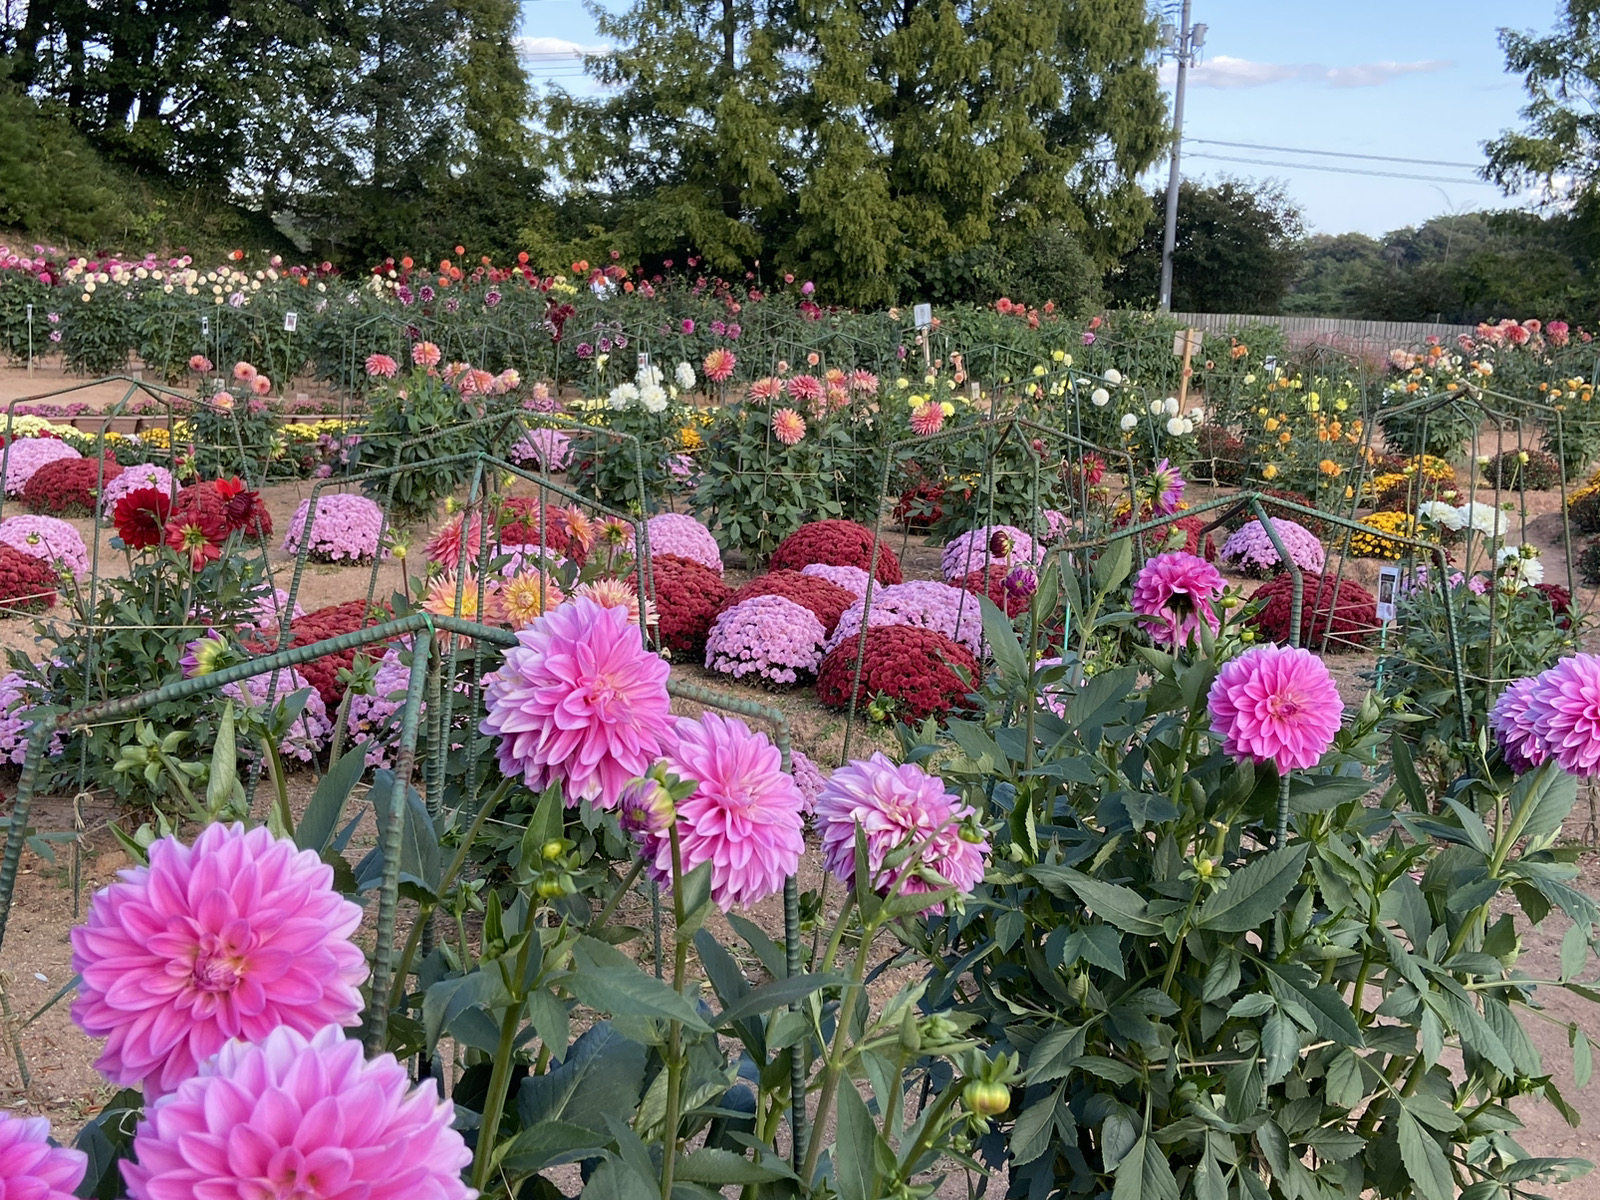 This is information published on October 6th (Friday) on the flowering of dahlia and garden mom.